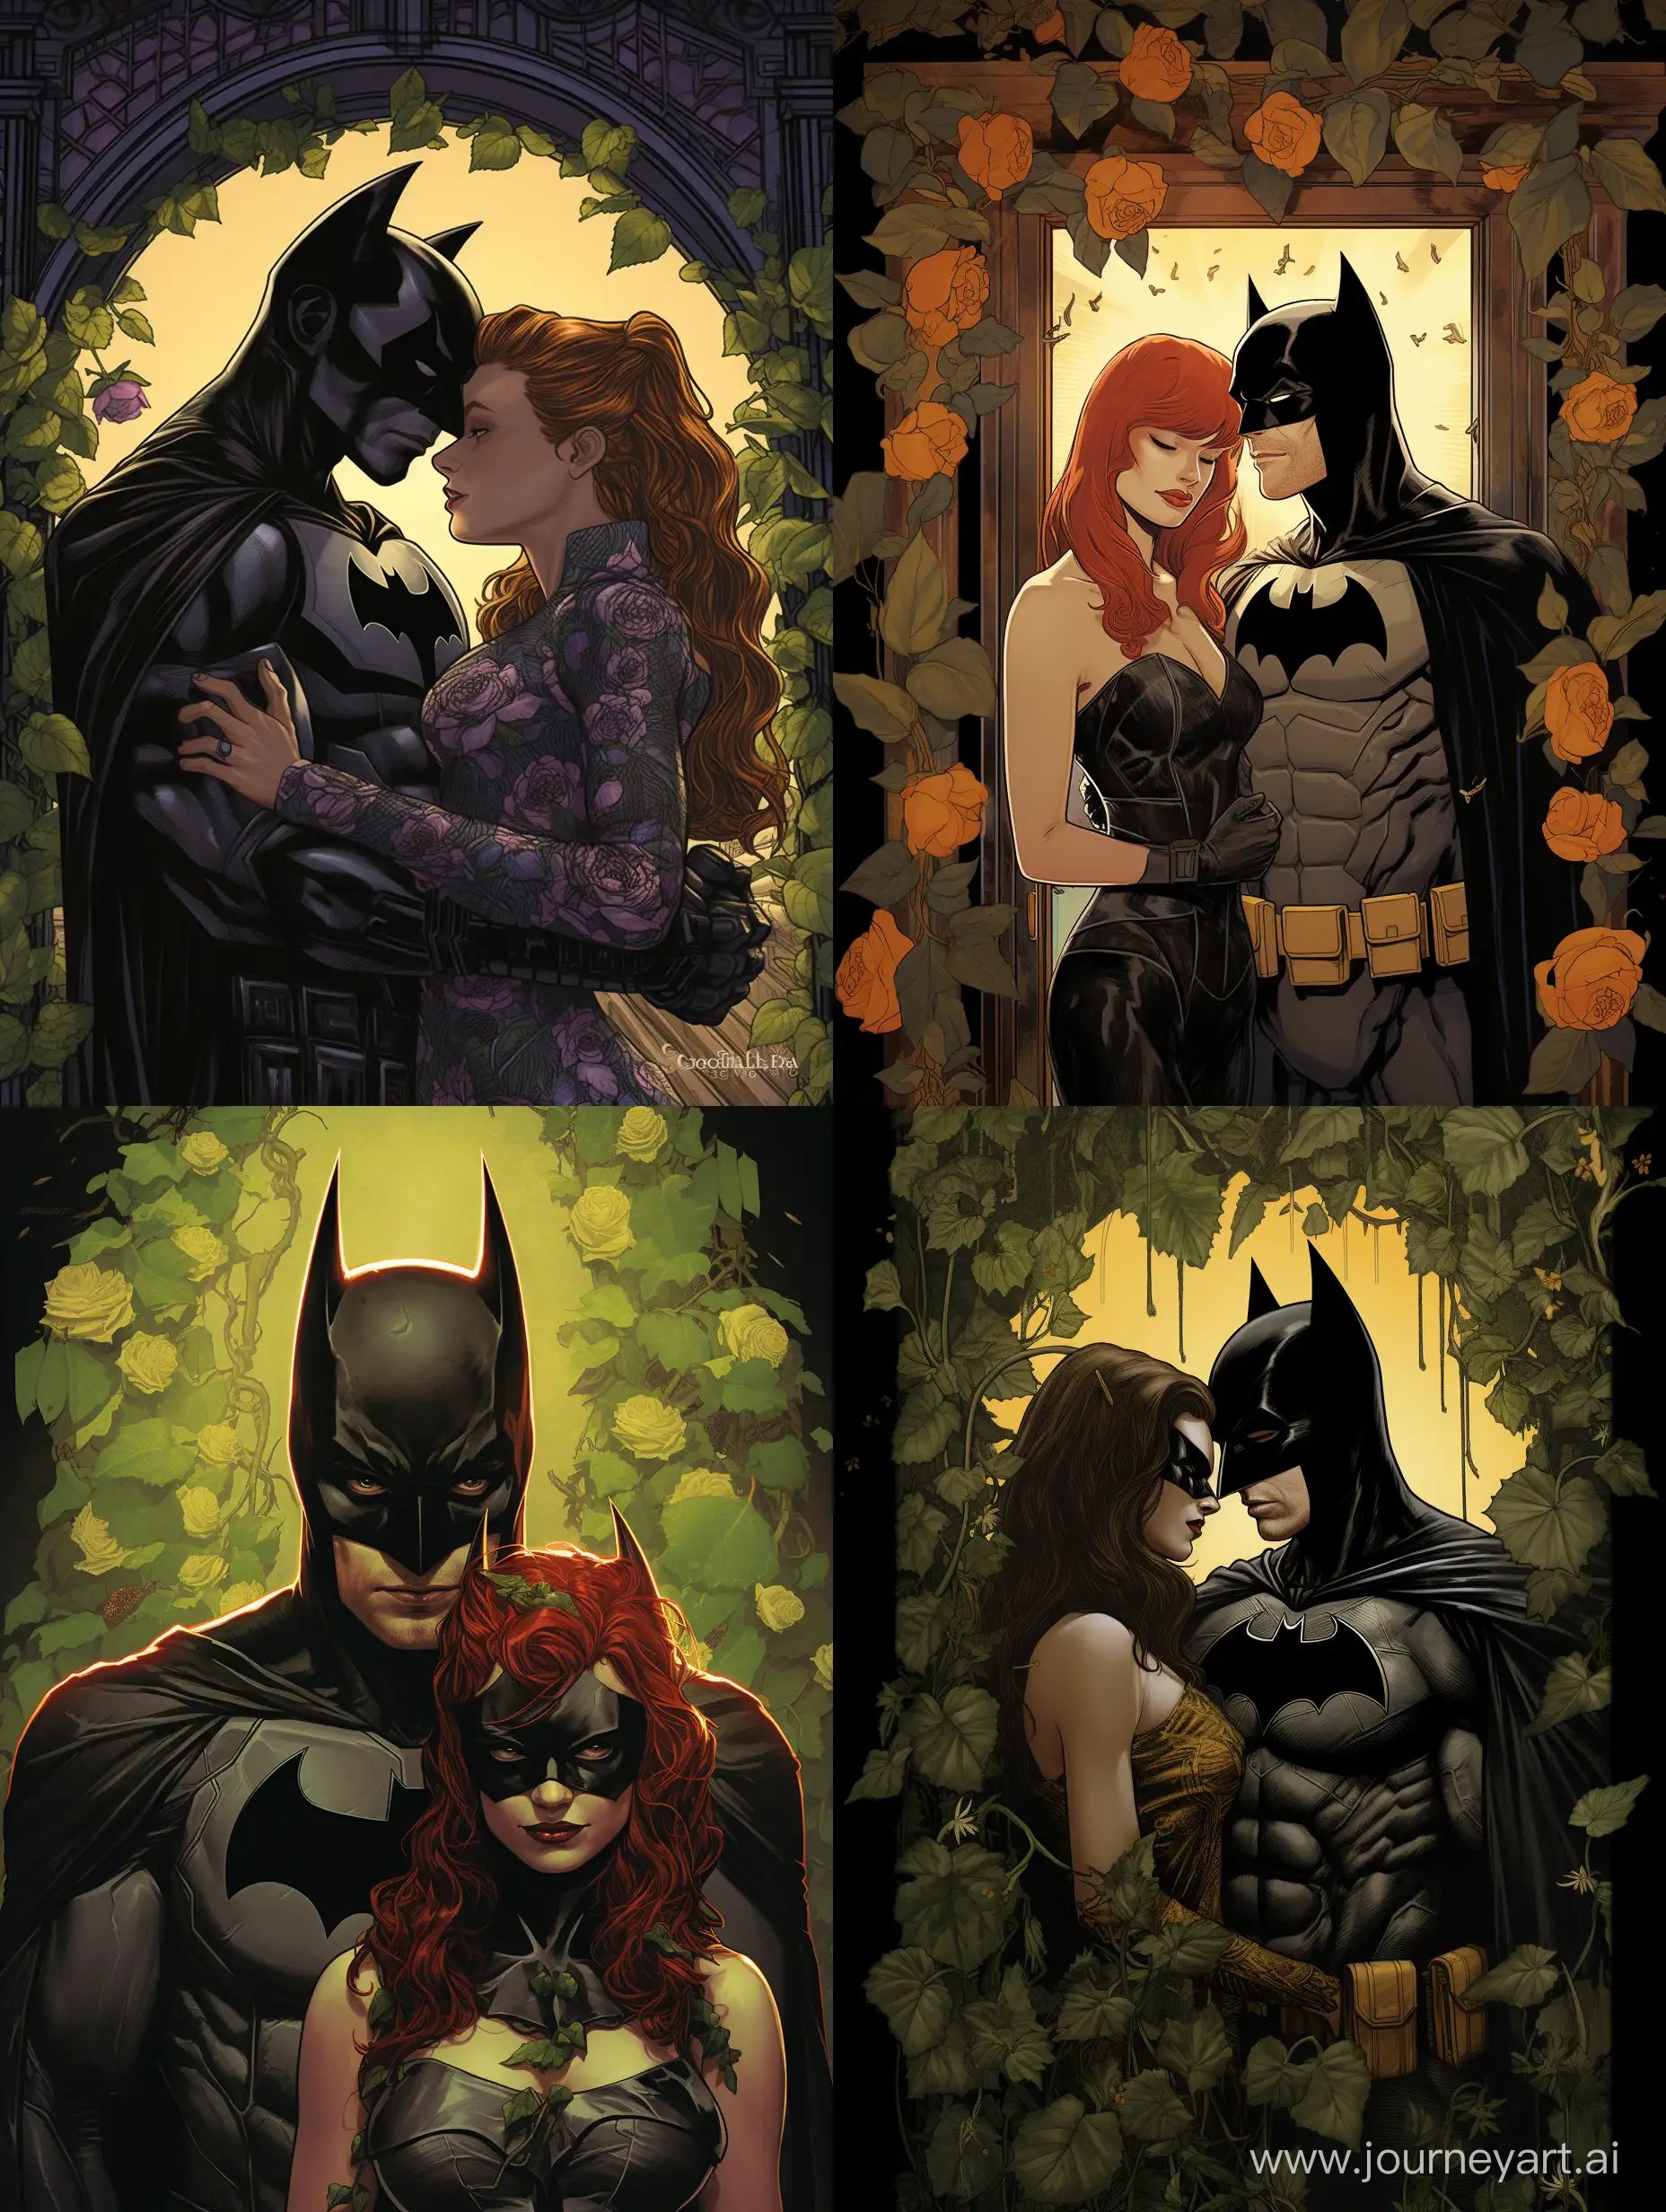 Whimsical-Childrens-Comic-Poison-Ivy-Rescues-and-Marries-Batman